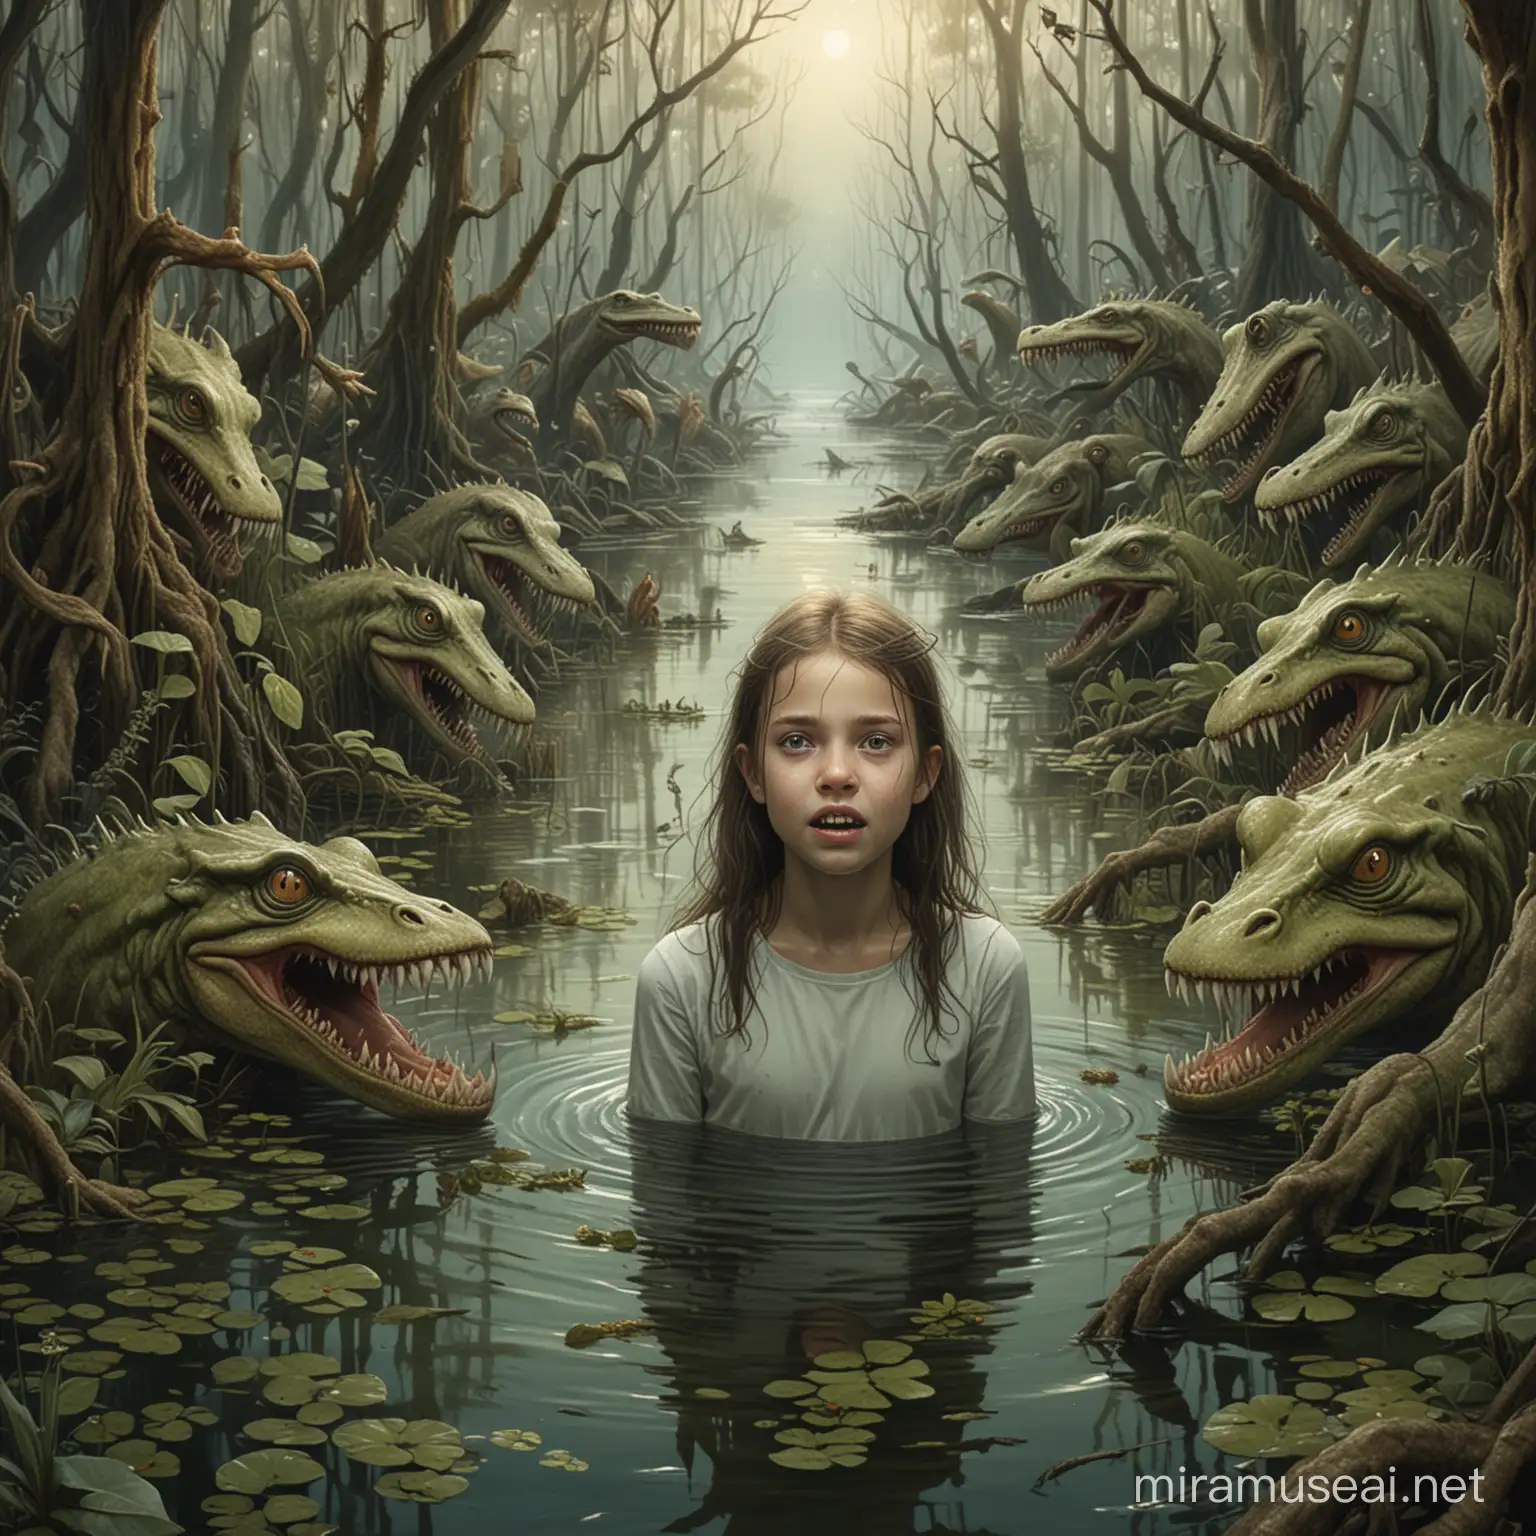 Surreal Swamp Encounter Young Girl Emerges Amid Mythical Creatures